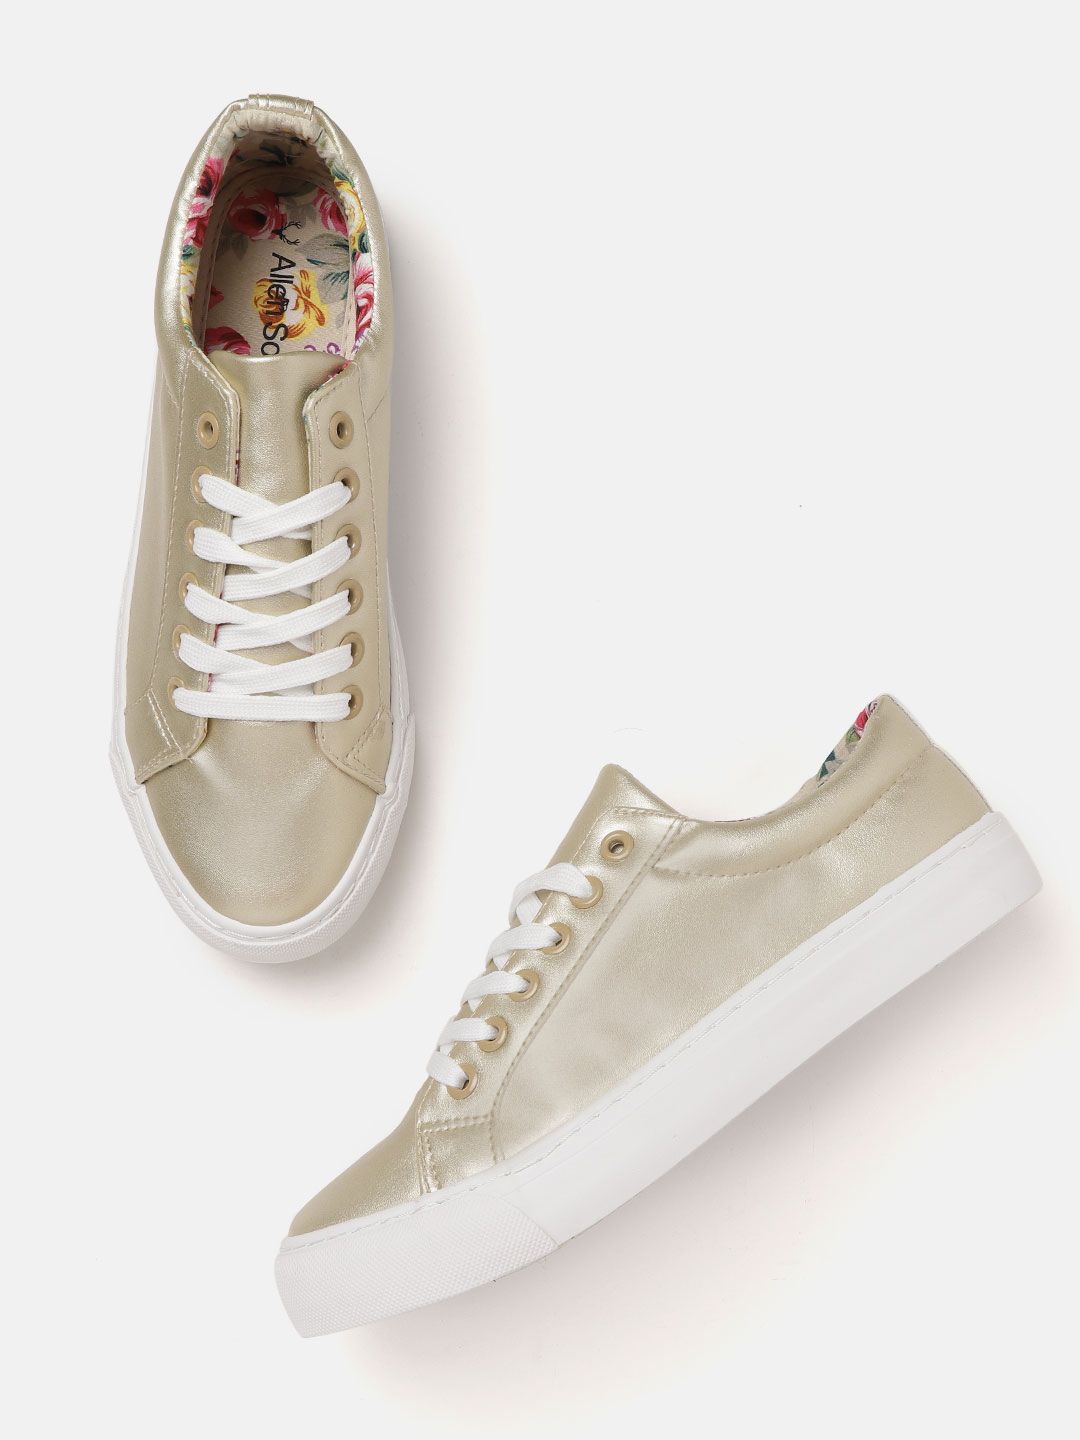 Allen Solly Women Gold-Toned Solid Sneakers Price in India